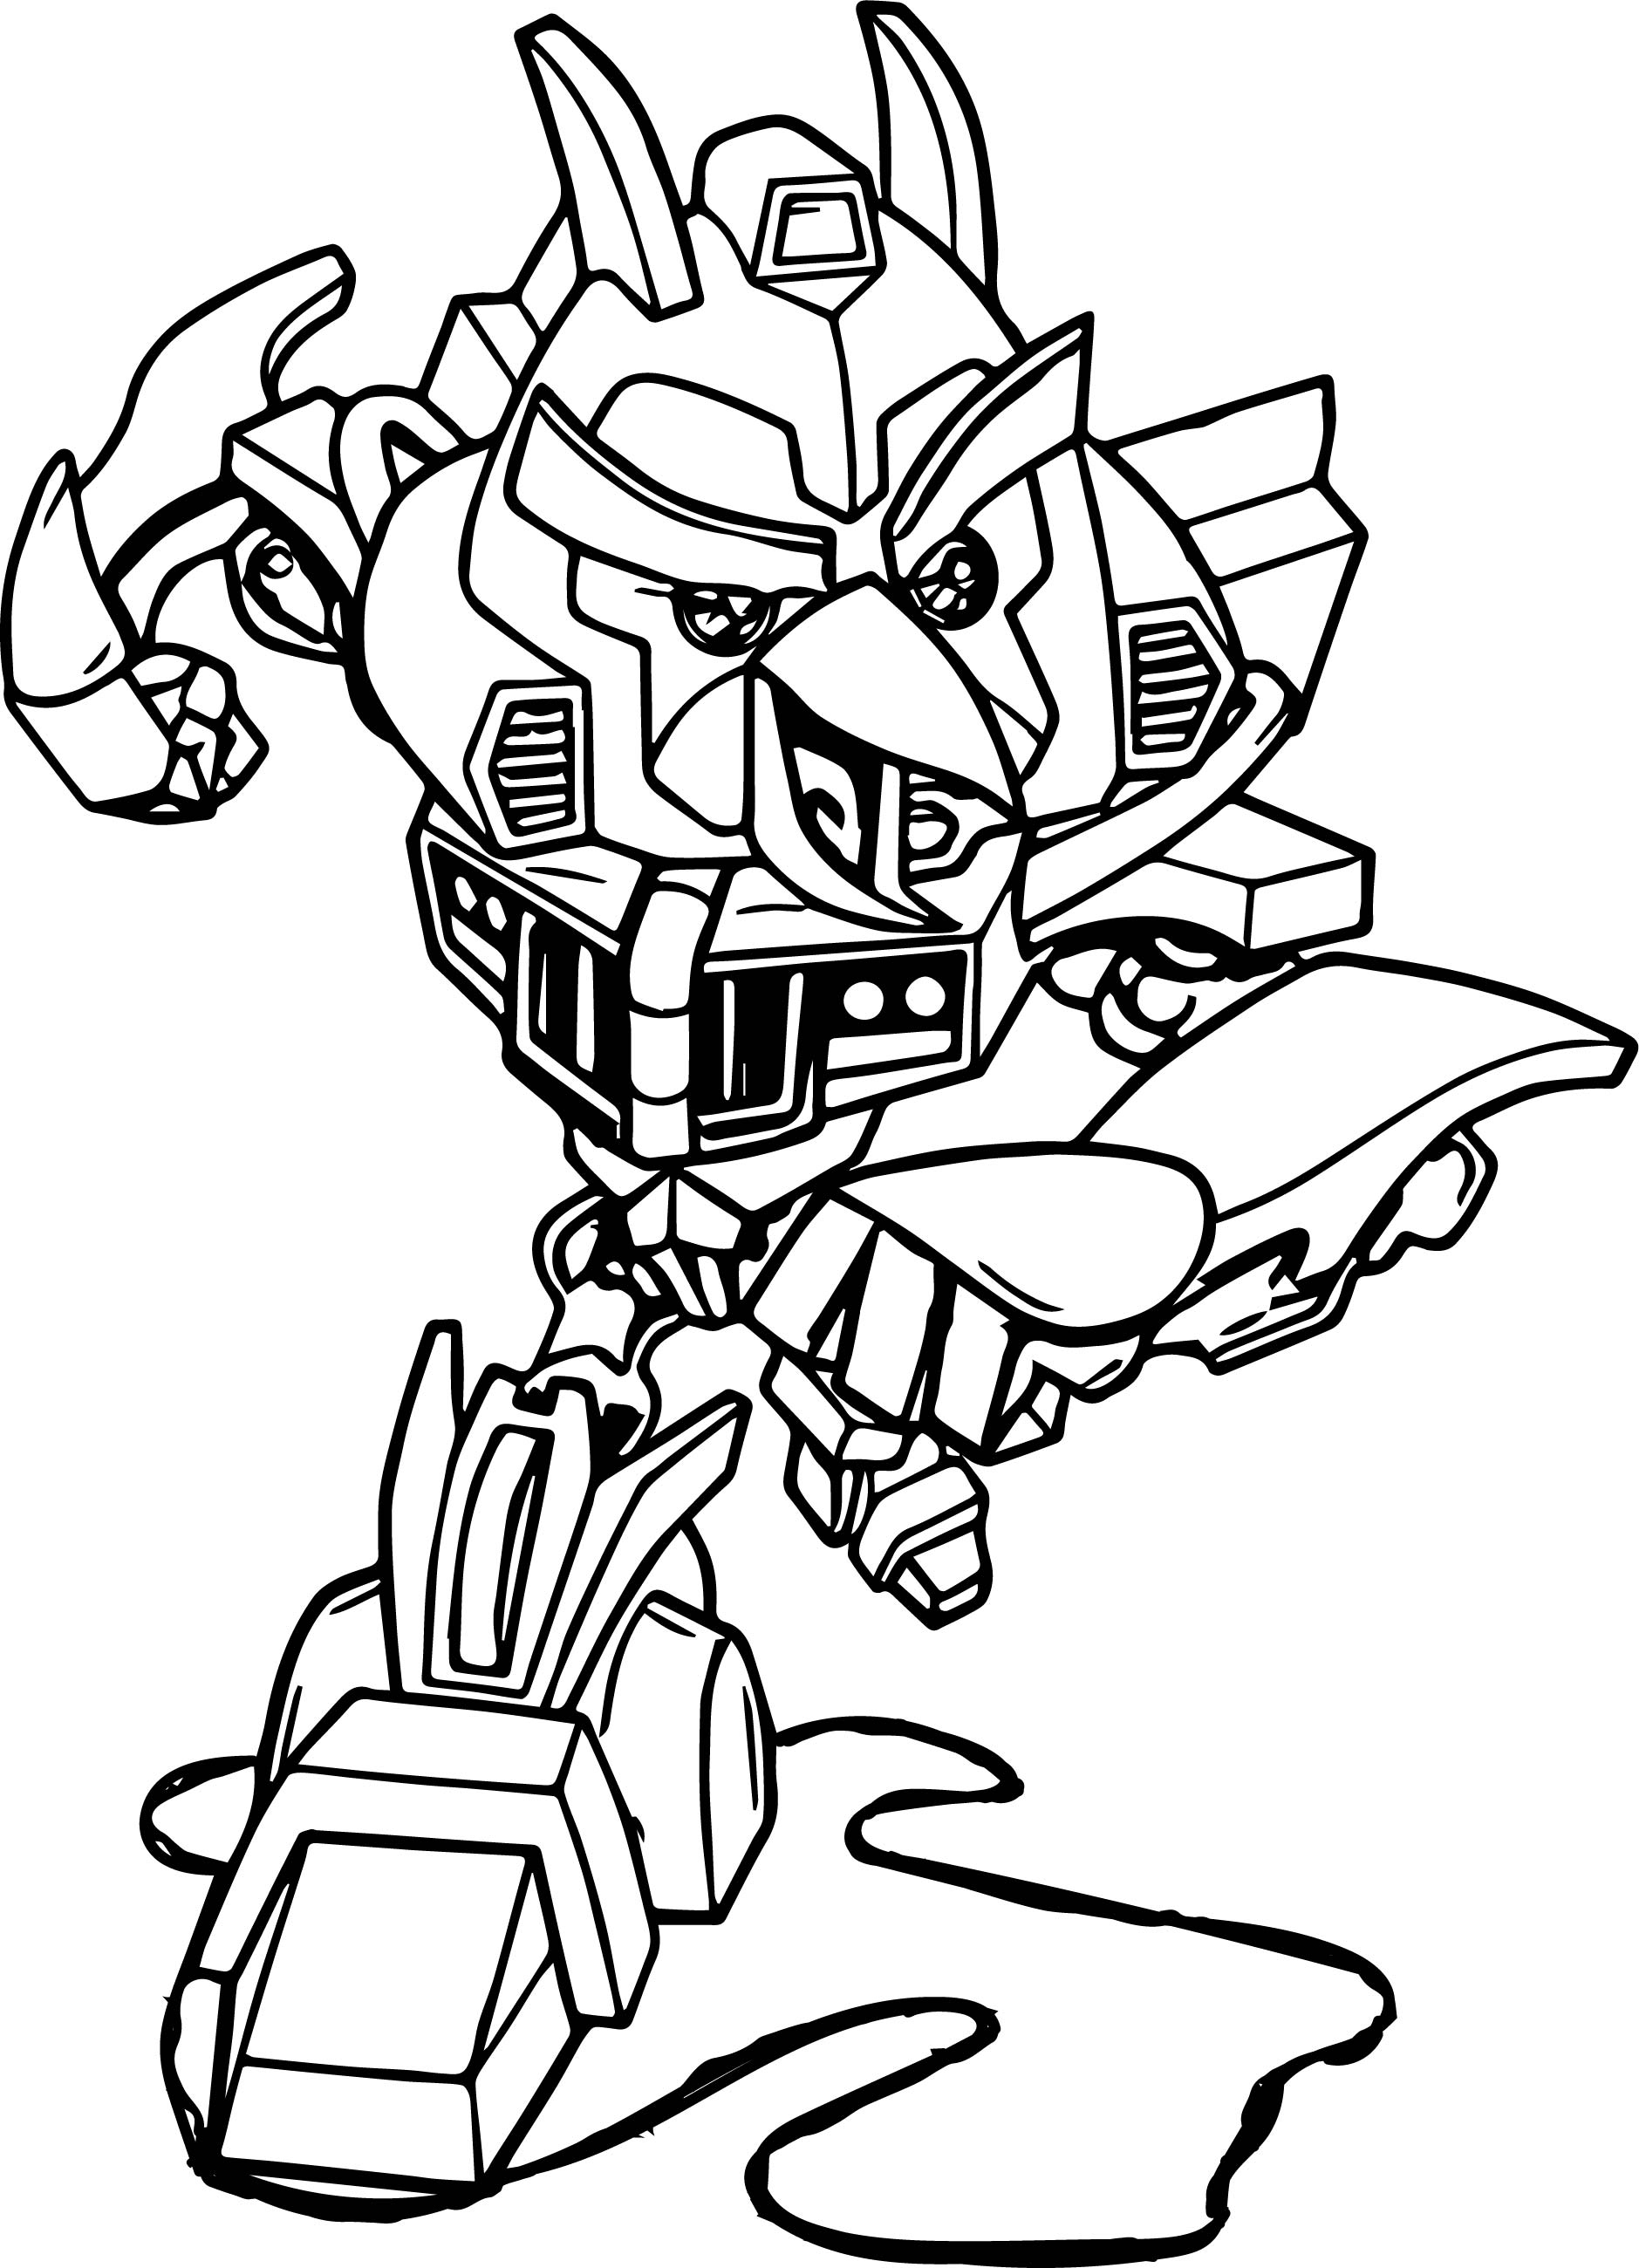 Printable Transformers Coloring Pages Coloring Ideas Free Transformer Coloring Pages Angry Bird